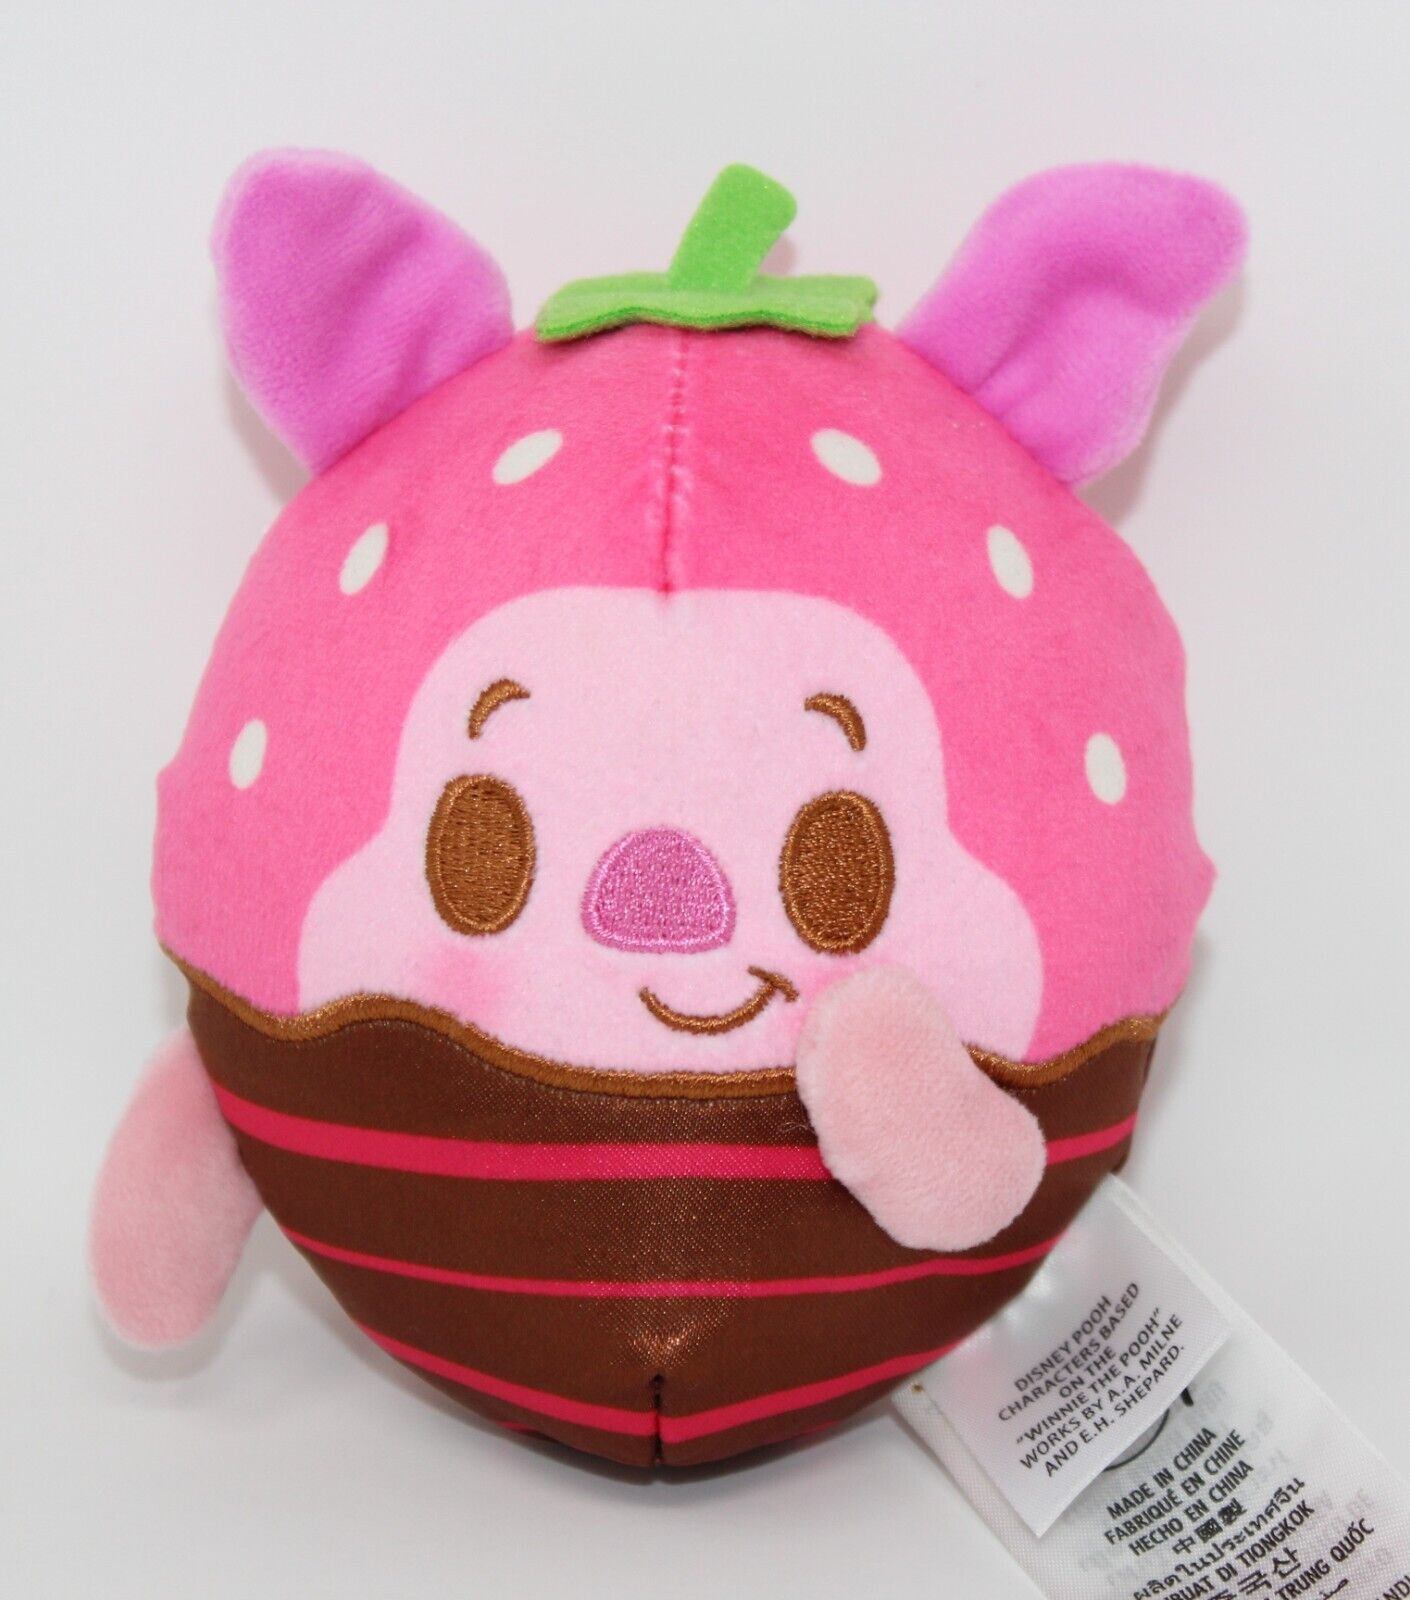 Disney Munchlings Plush Piglet Chocolate Dipped Strawberry Scented Fruity Finds